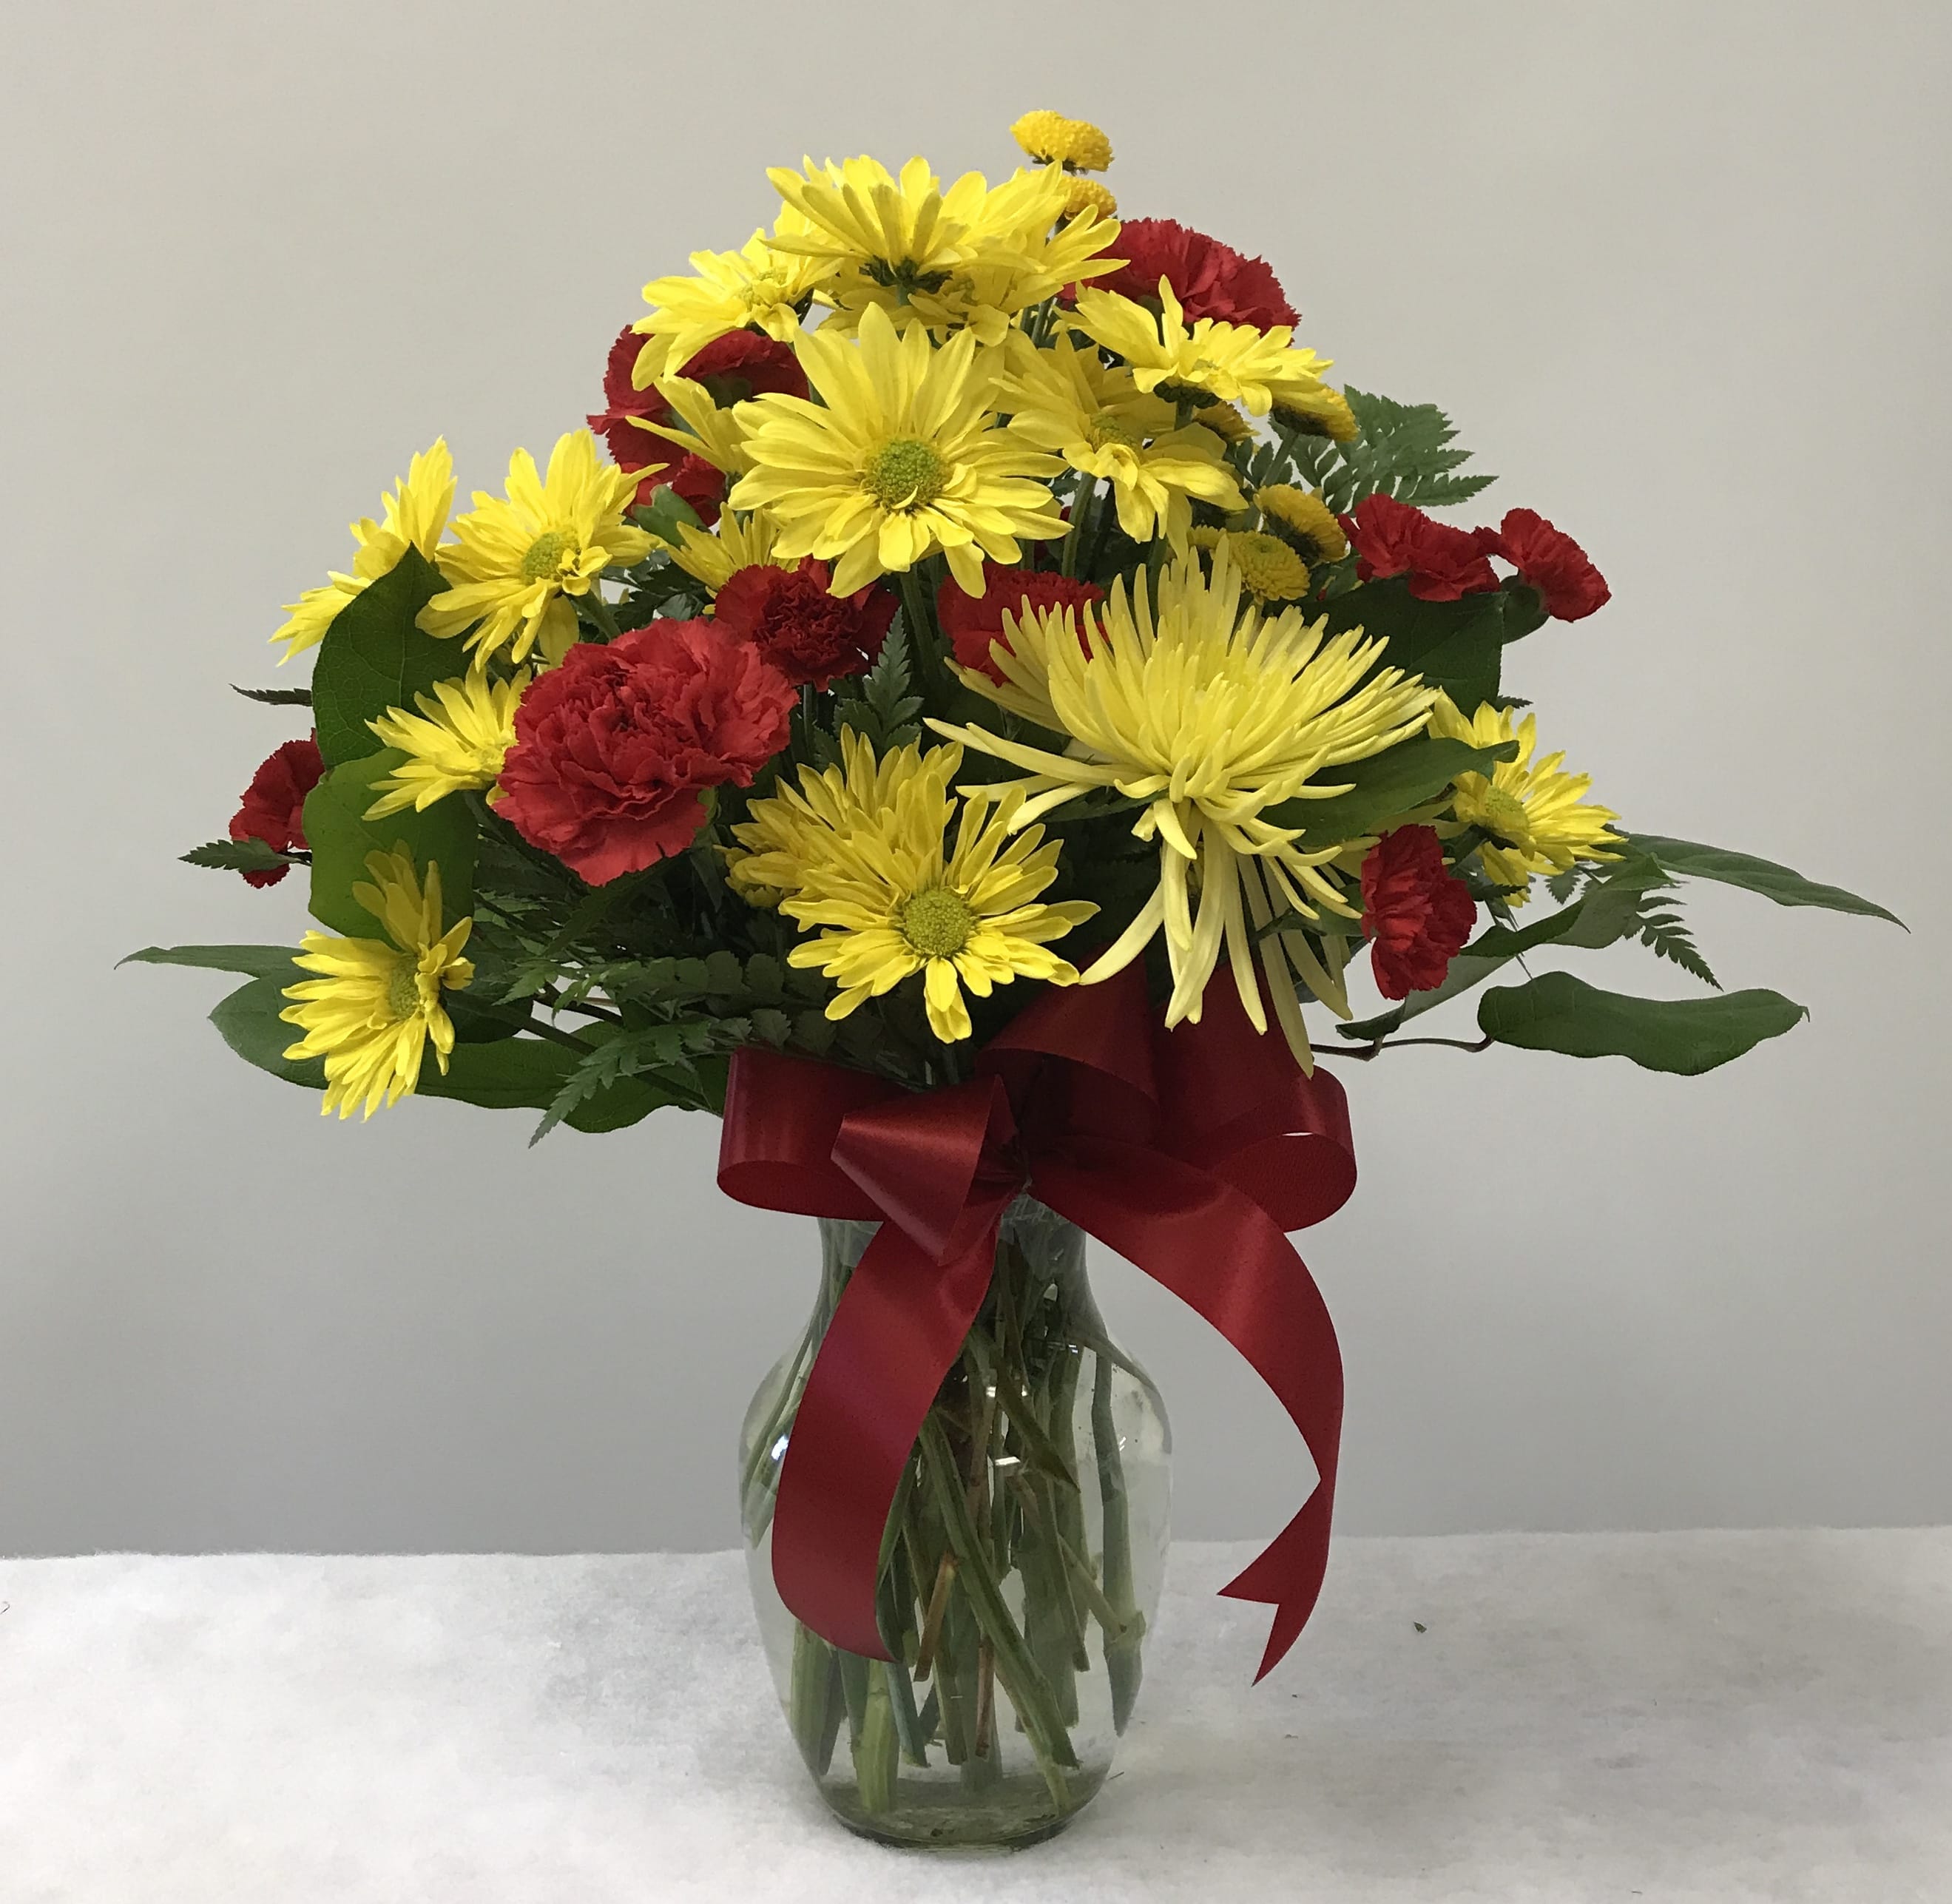  Kindest Heart Bouquet - A special show of kindness, on any day of the year! This eye-catching arrangement of red carnations, yellow daisies and chrysanthemums will surprise and delight your special someone - and remain a treasured memory for years to come. You may wish to substitute white for the yellow.  Just make a note in special instructions or give us a call to place your order. Orientation:  All-around  